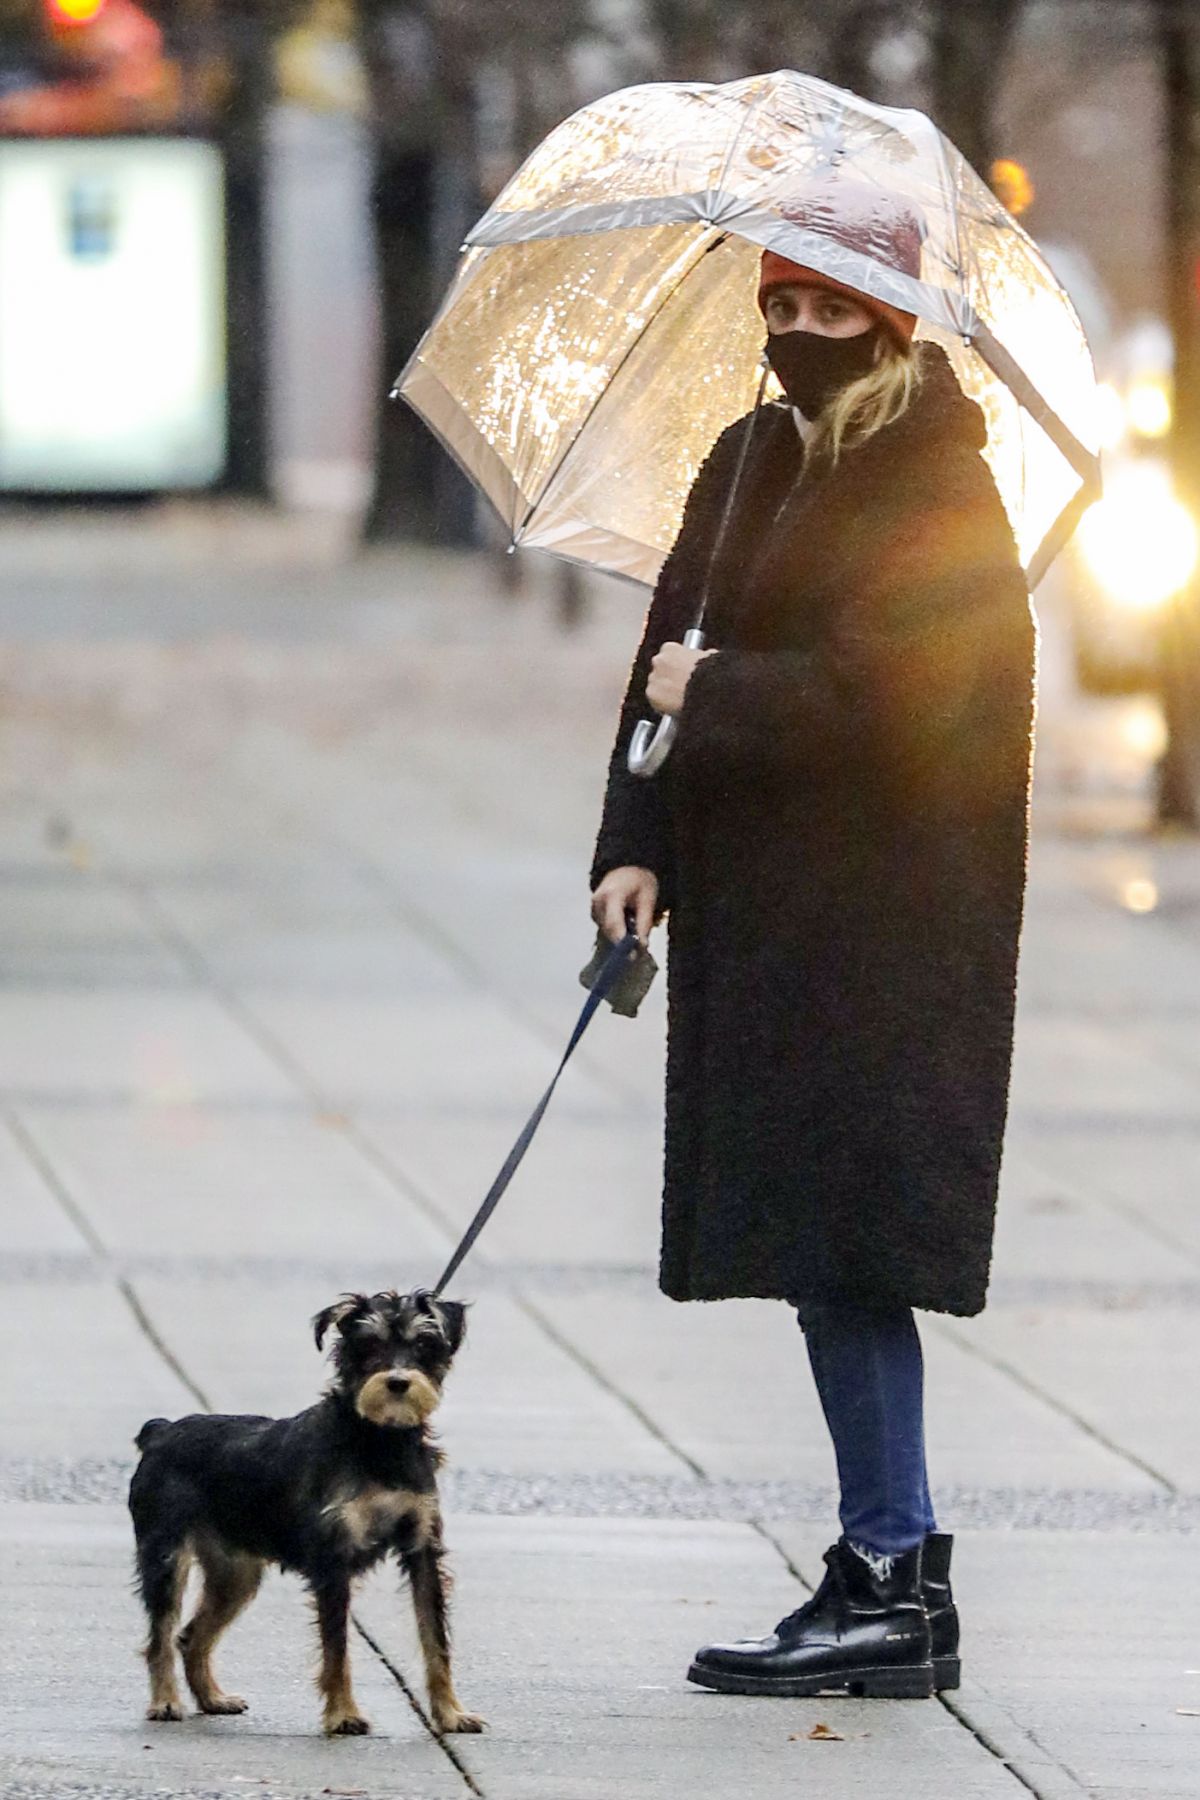 lili-reinhart-out-with-her-dog-in-vancouver-11-14-2020-9.jpg